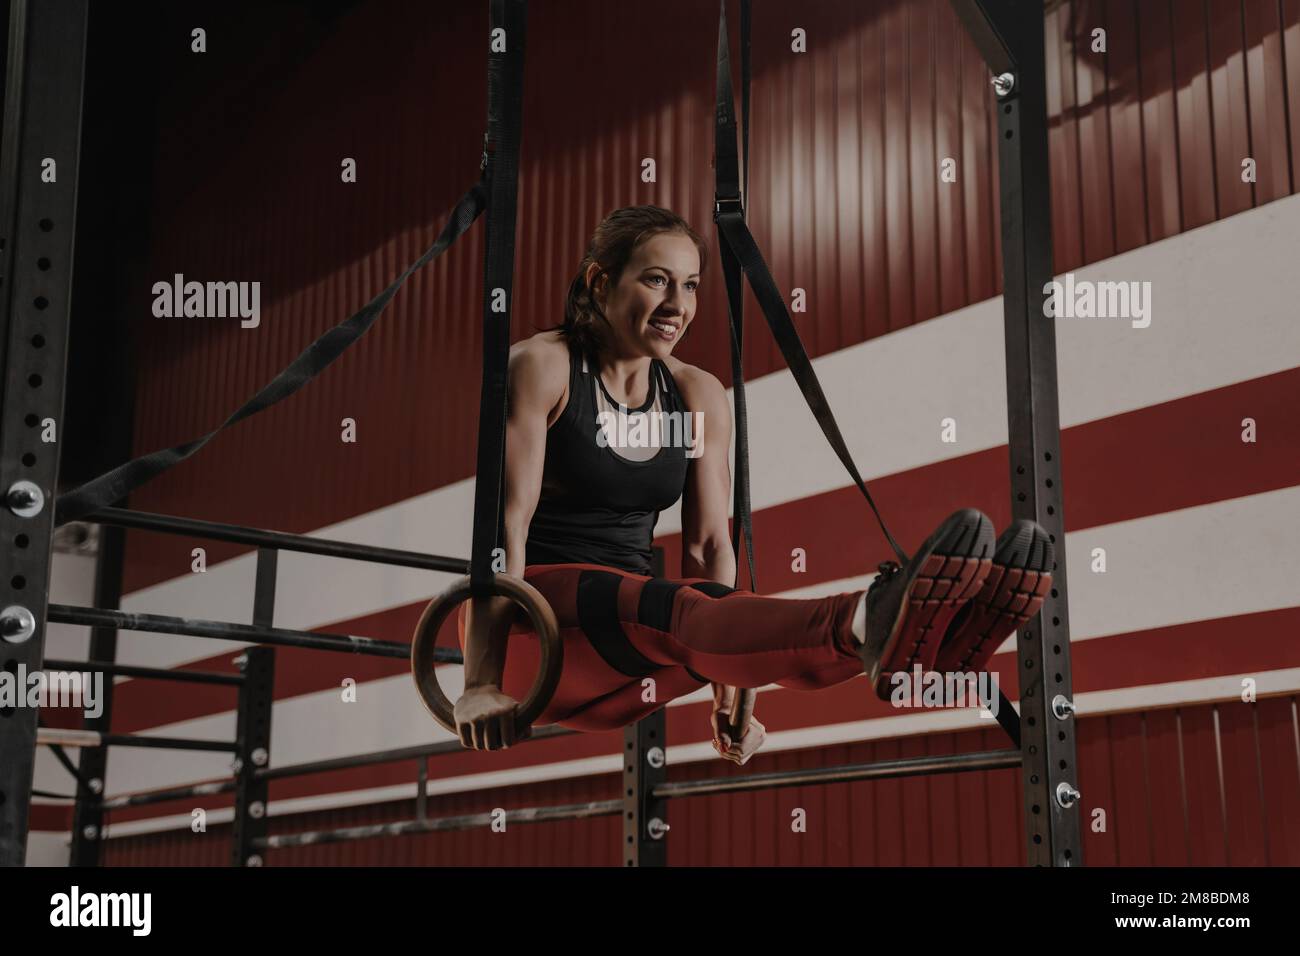 Cheerful crossfit woman doing abs exercises on gymnastic rings. Female athlete works on her abdomenal muscles during workouts at the gym. Stock Photo